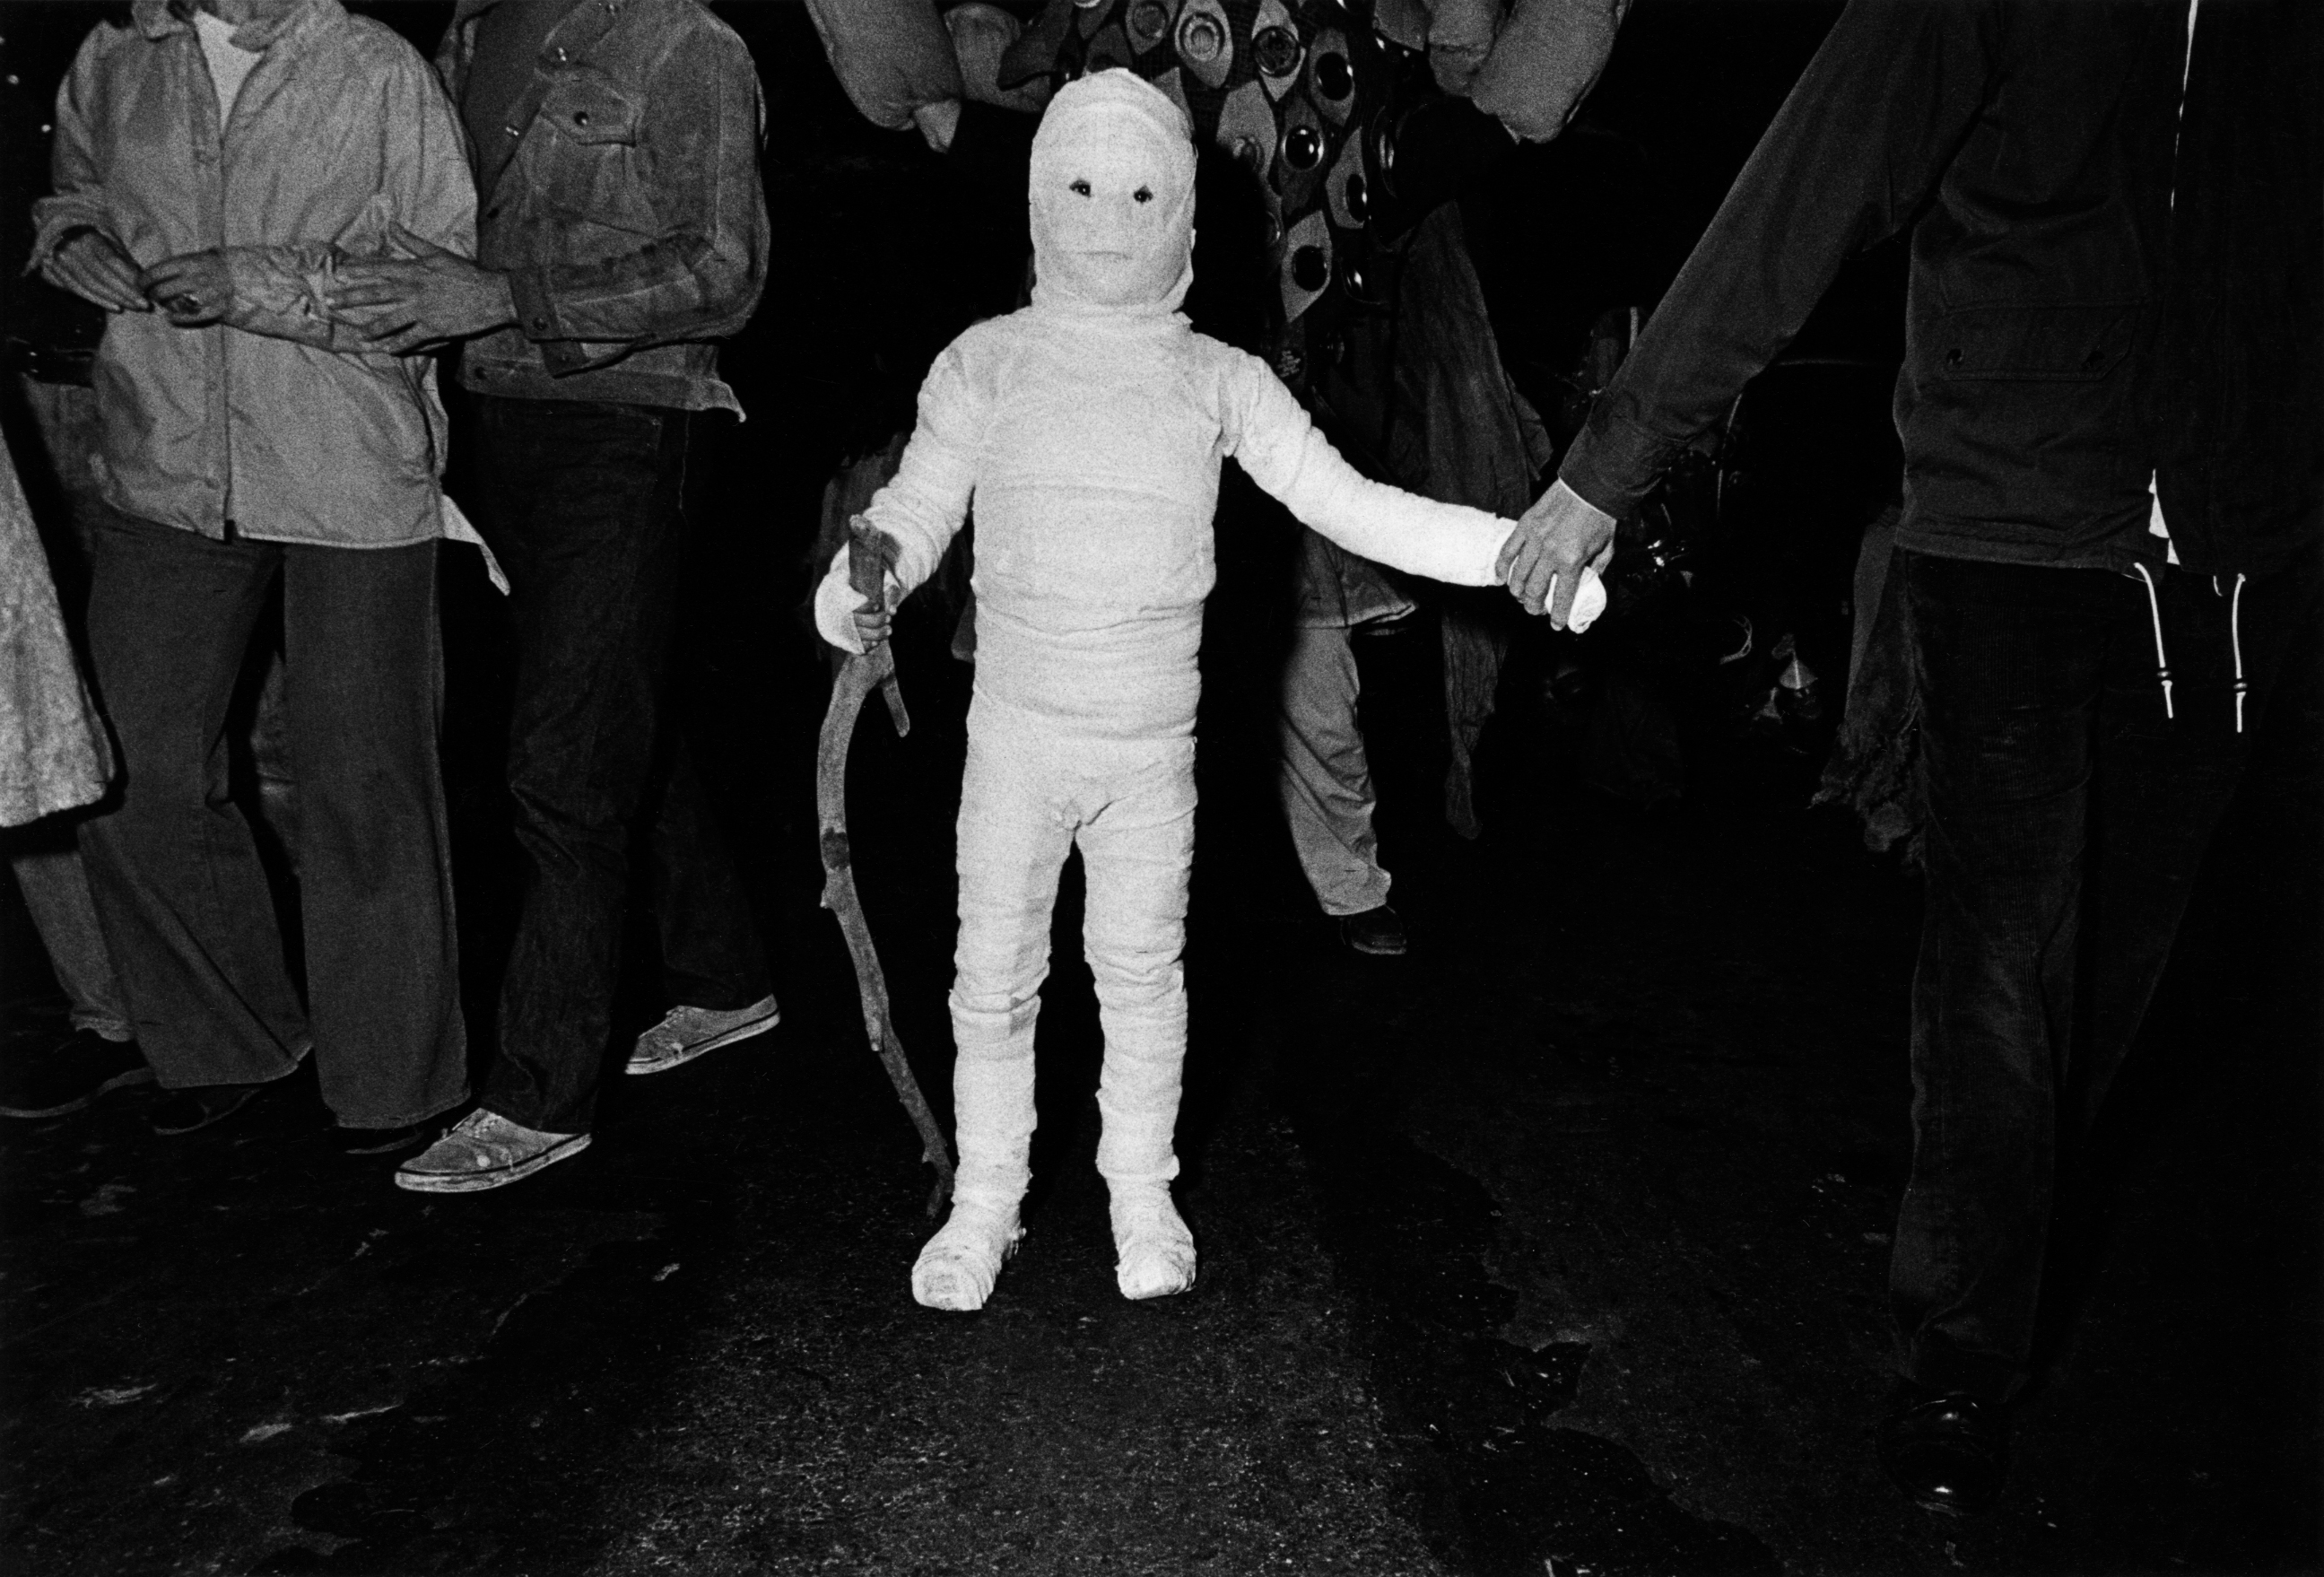 A young mummy at the New York City Halloween Parade, 1977.